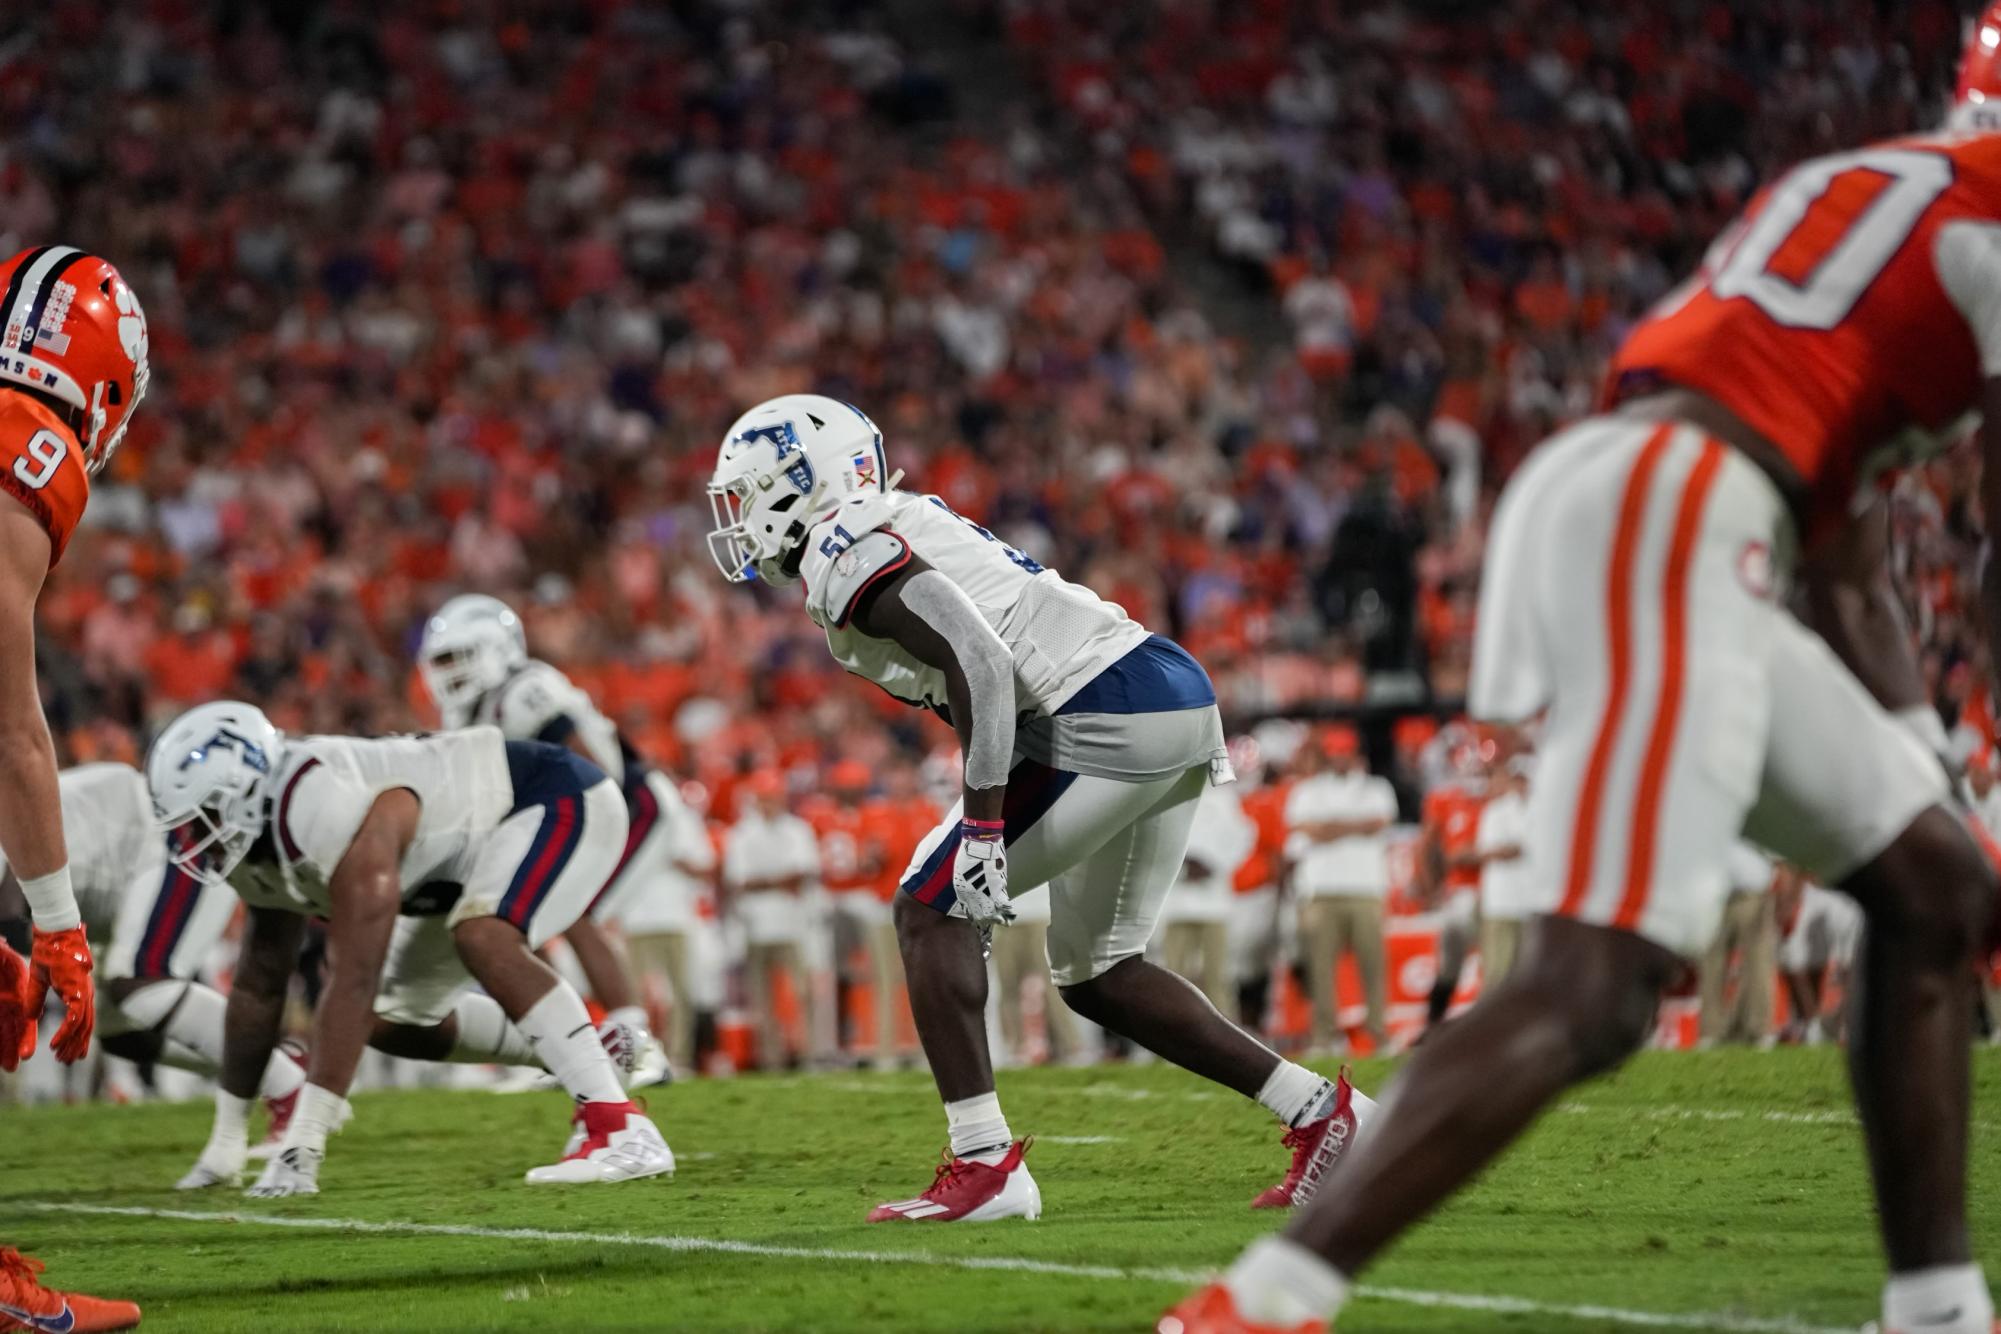 FAU junior outside linebacker Courtney McBride (#51) lines up before the Clemson Tigers offense snaps the ball. September 16, 2023.